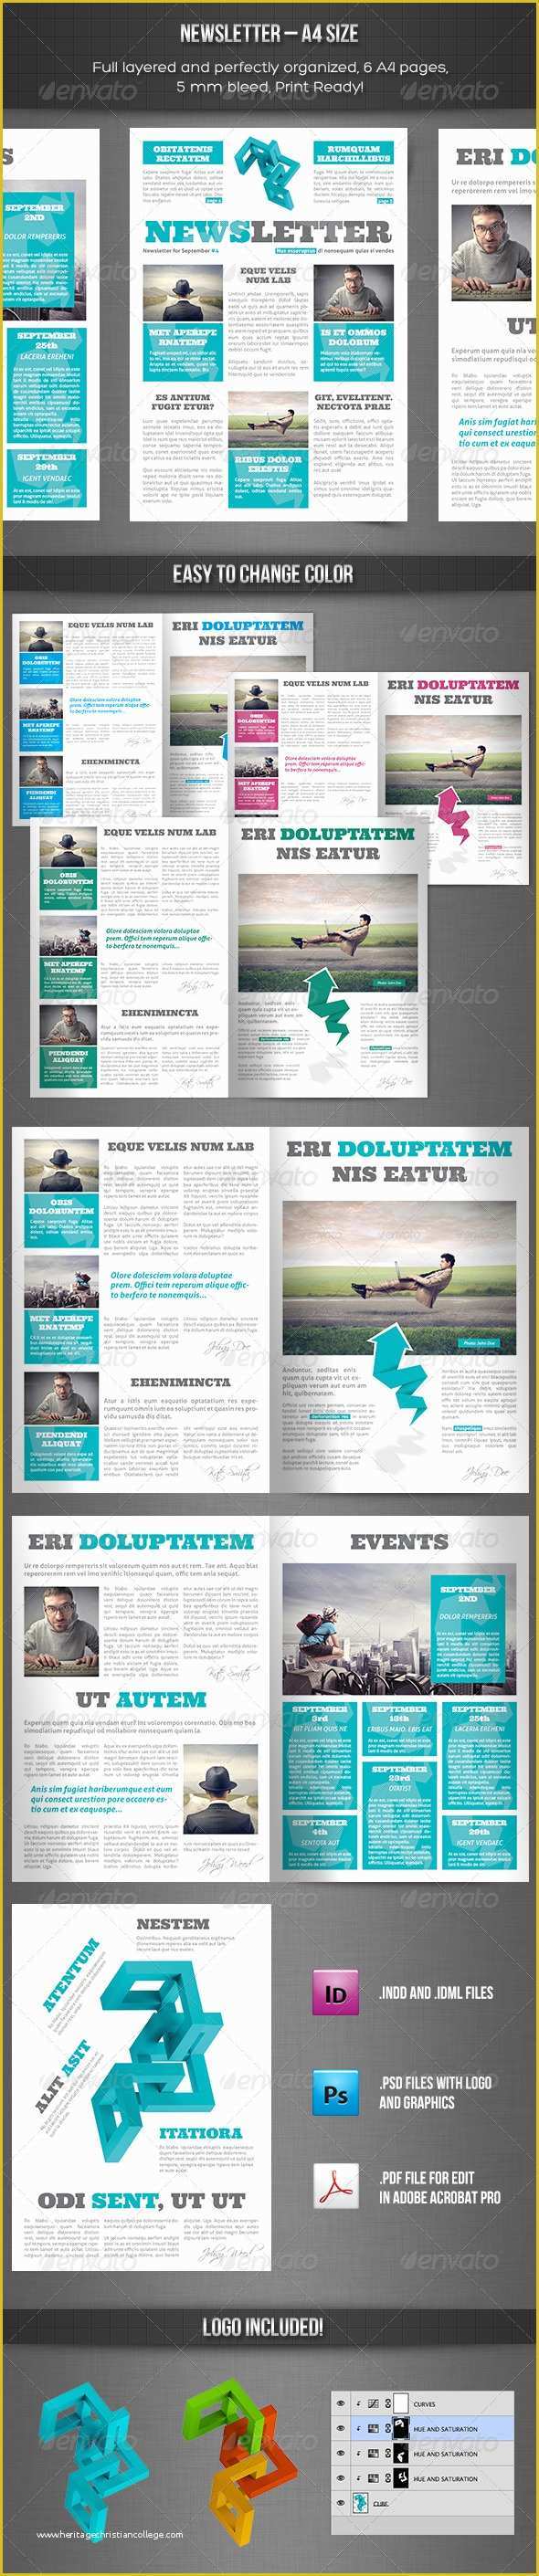 Free Indesign Newsletter Templates Of Beau Free Indesign Templates Newsletter Free Indesign